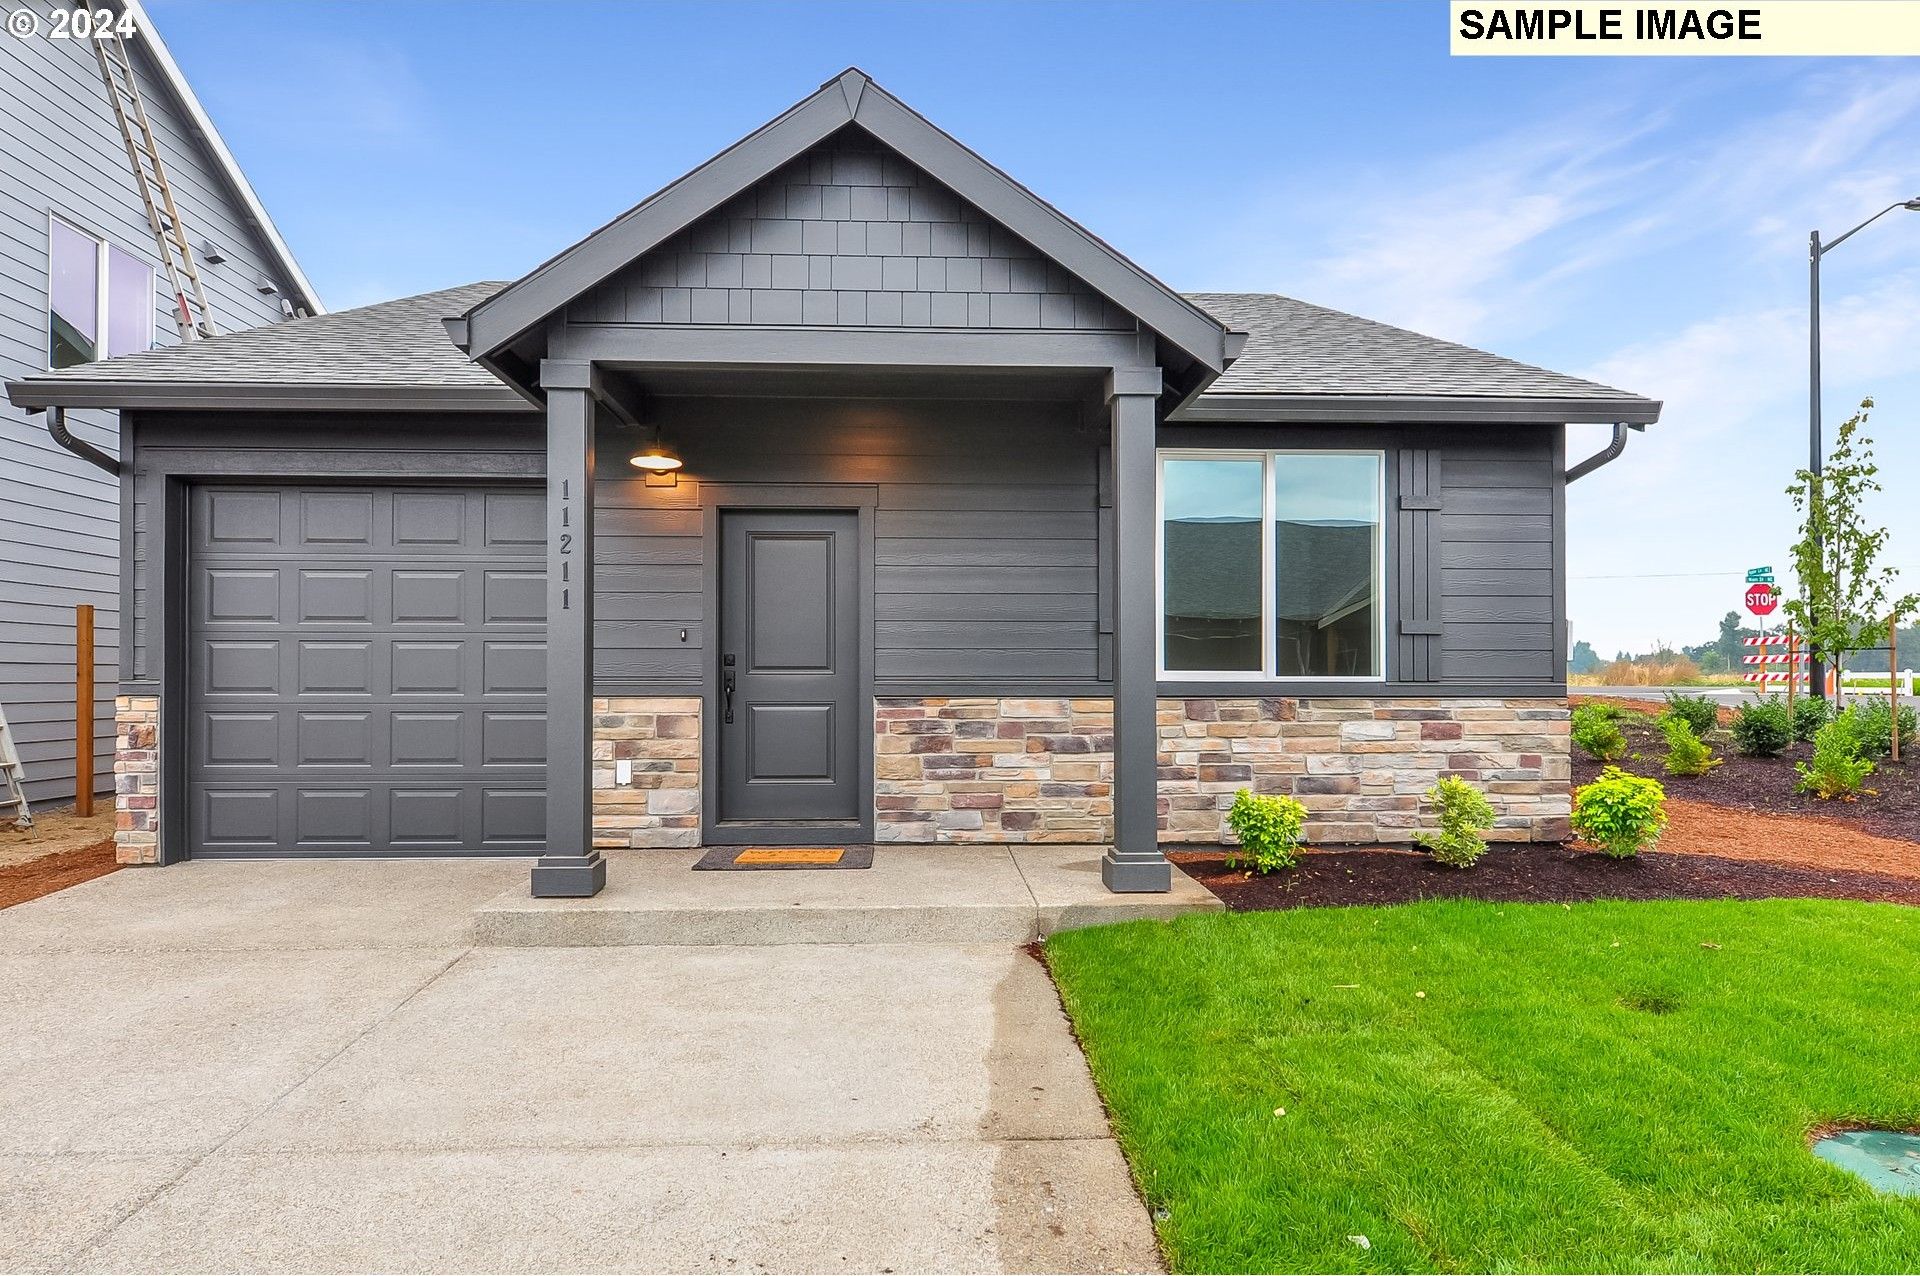 11235 Blueberry Loop. Donald, OR 97020